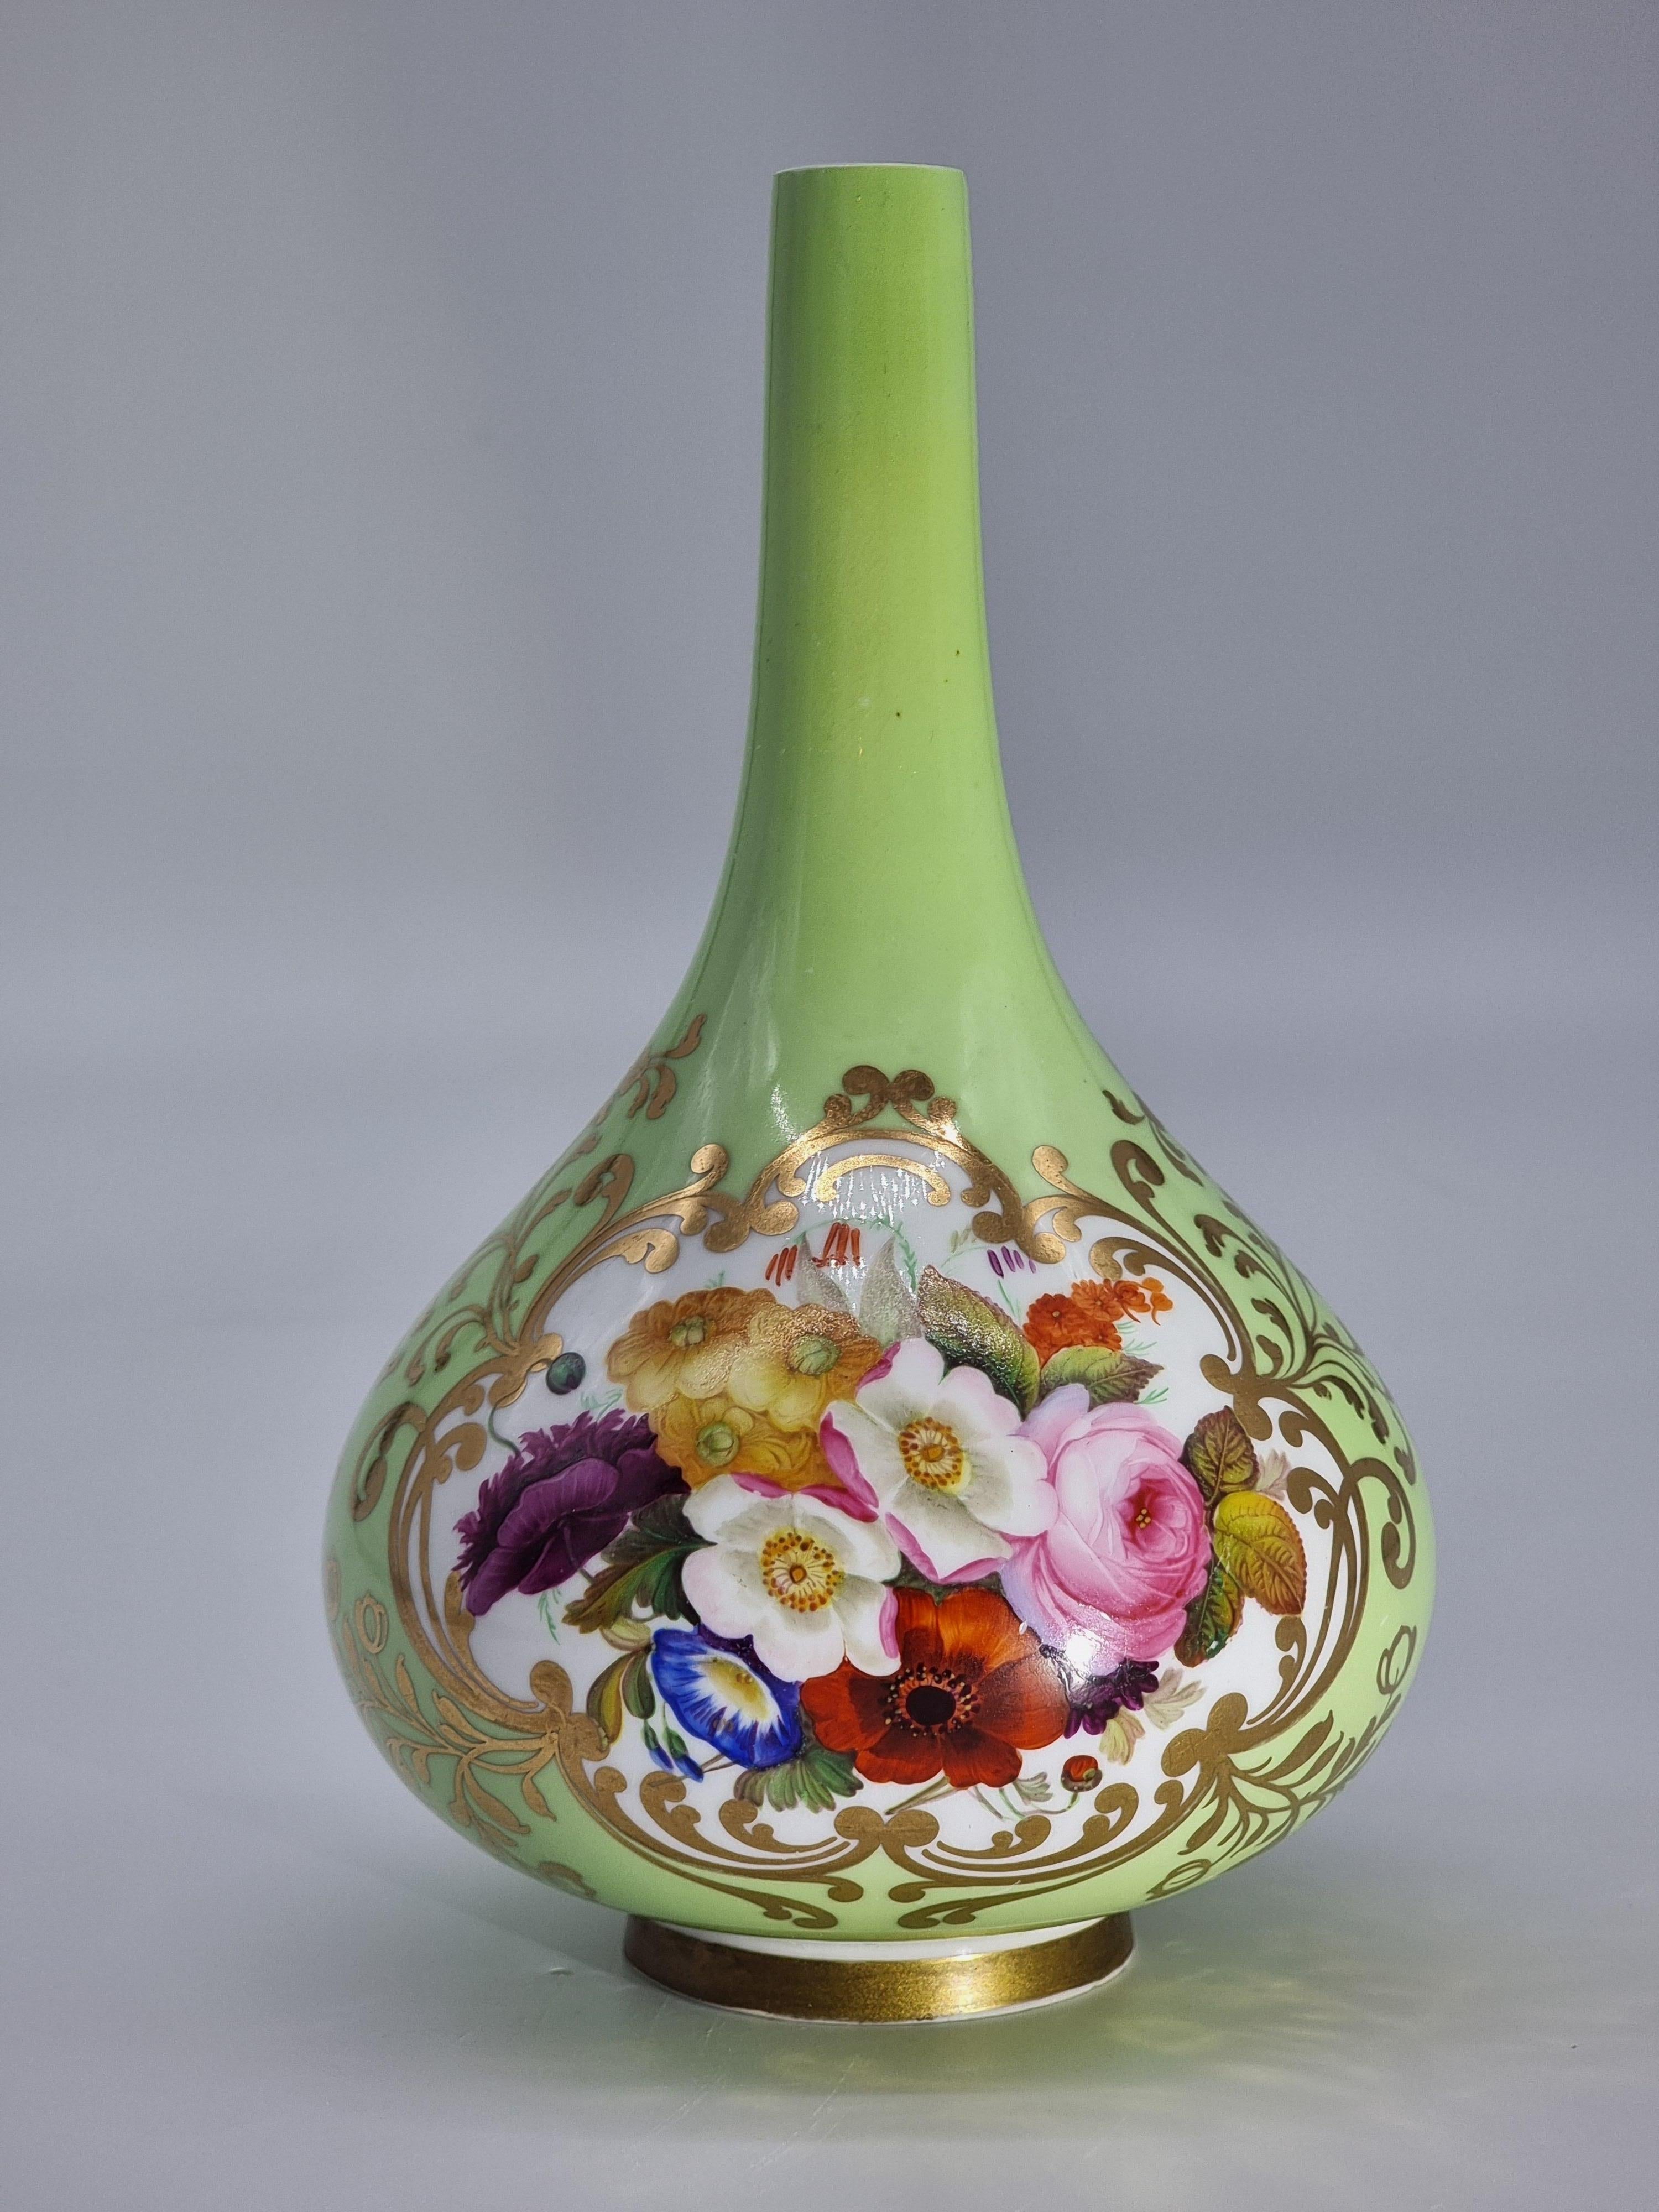 This very pleasing early porcelain early English porcelain vase was made at the Chamberlain and Co. Factory in Worcester which had London showrooms at 155 New Bond Street and Coventry Street, London.

This elegant vase dates to circa 1830. It is